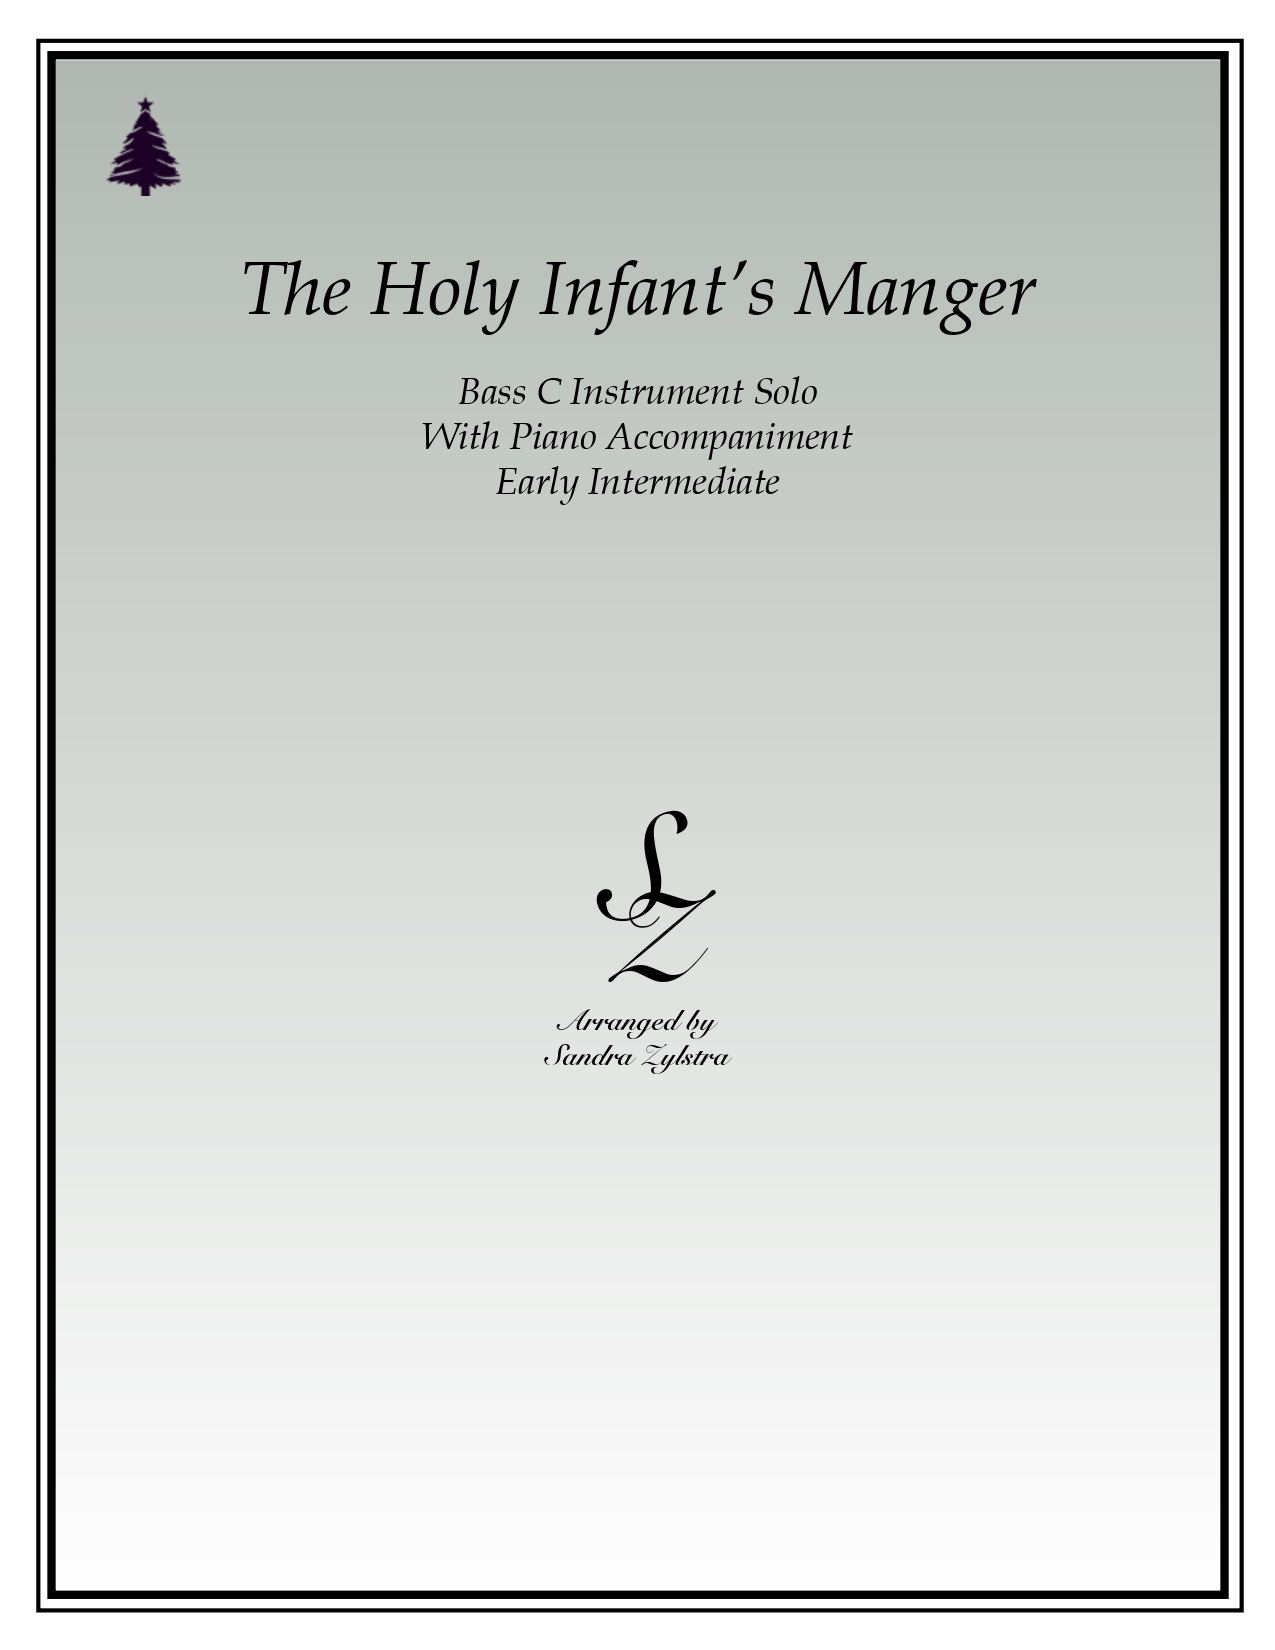 The Holy Infants Manger bass C instrument solo part cover page 00011